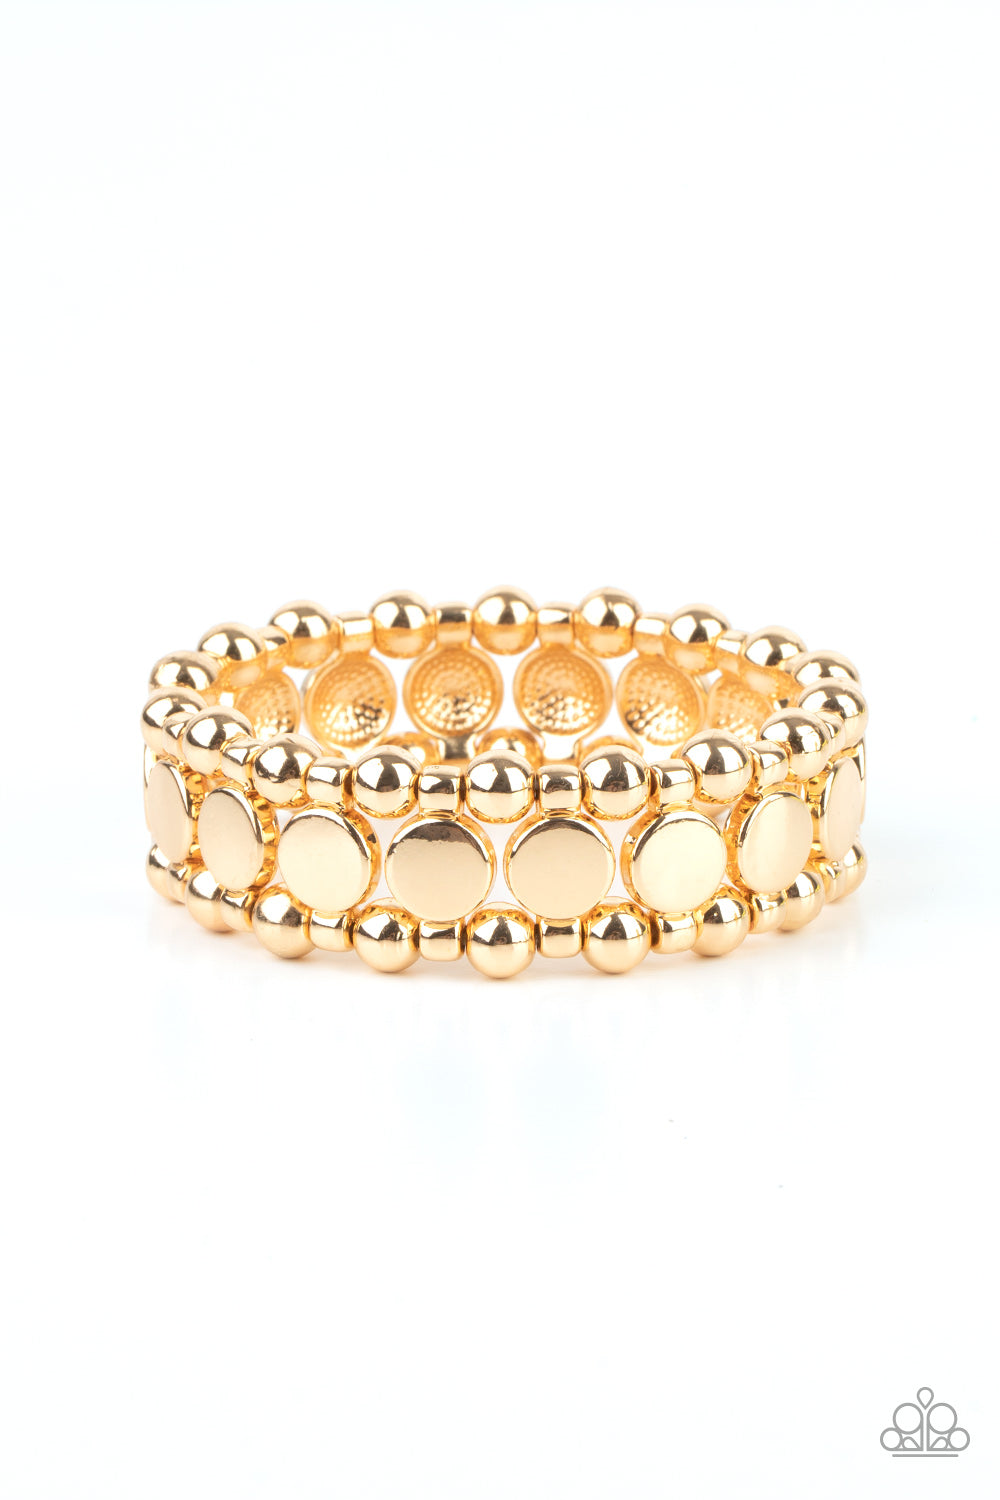 Metro Magnetism Gold Bracelet - Paparazzi Accessories  Glistening gold disc fittings and pairs of classic gold beads are threaded along stretchy bands around the wrist that connect into a bold industrial display around the wrist.  All Paparazzi Accessories are lead free and nickel free!  Sold as one individual bracelet.